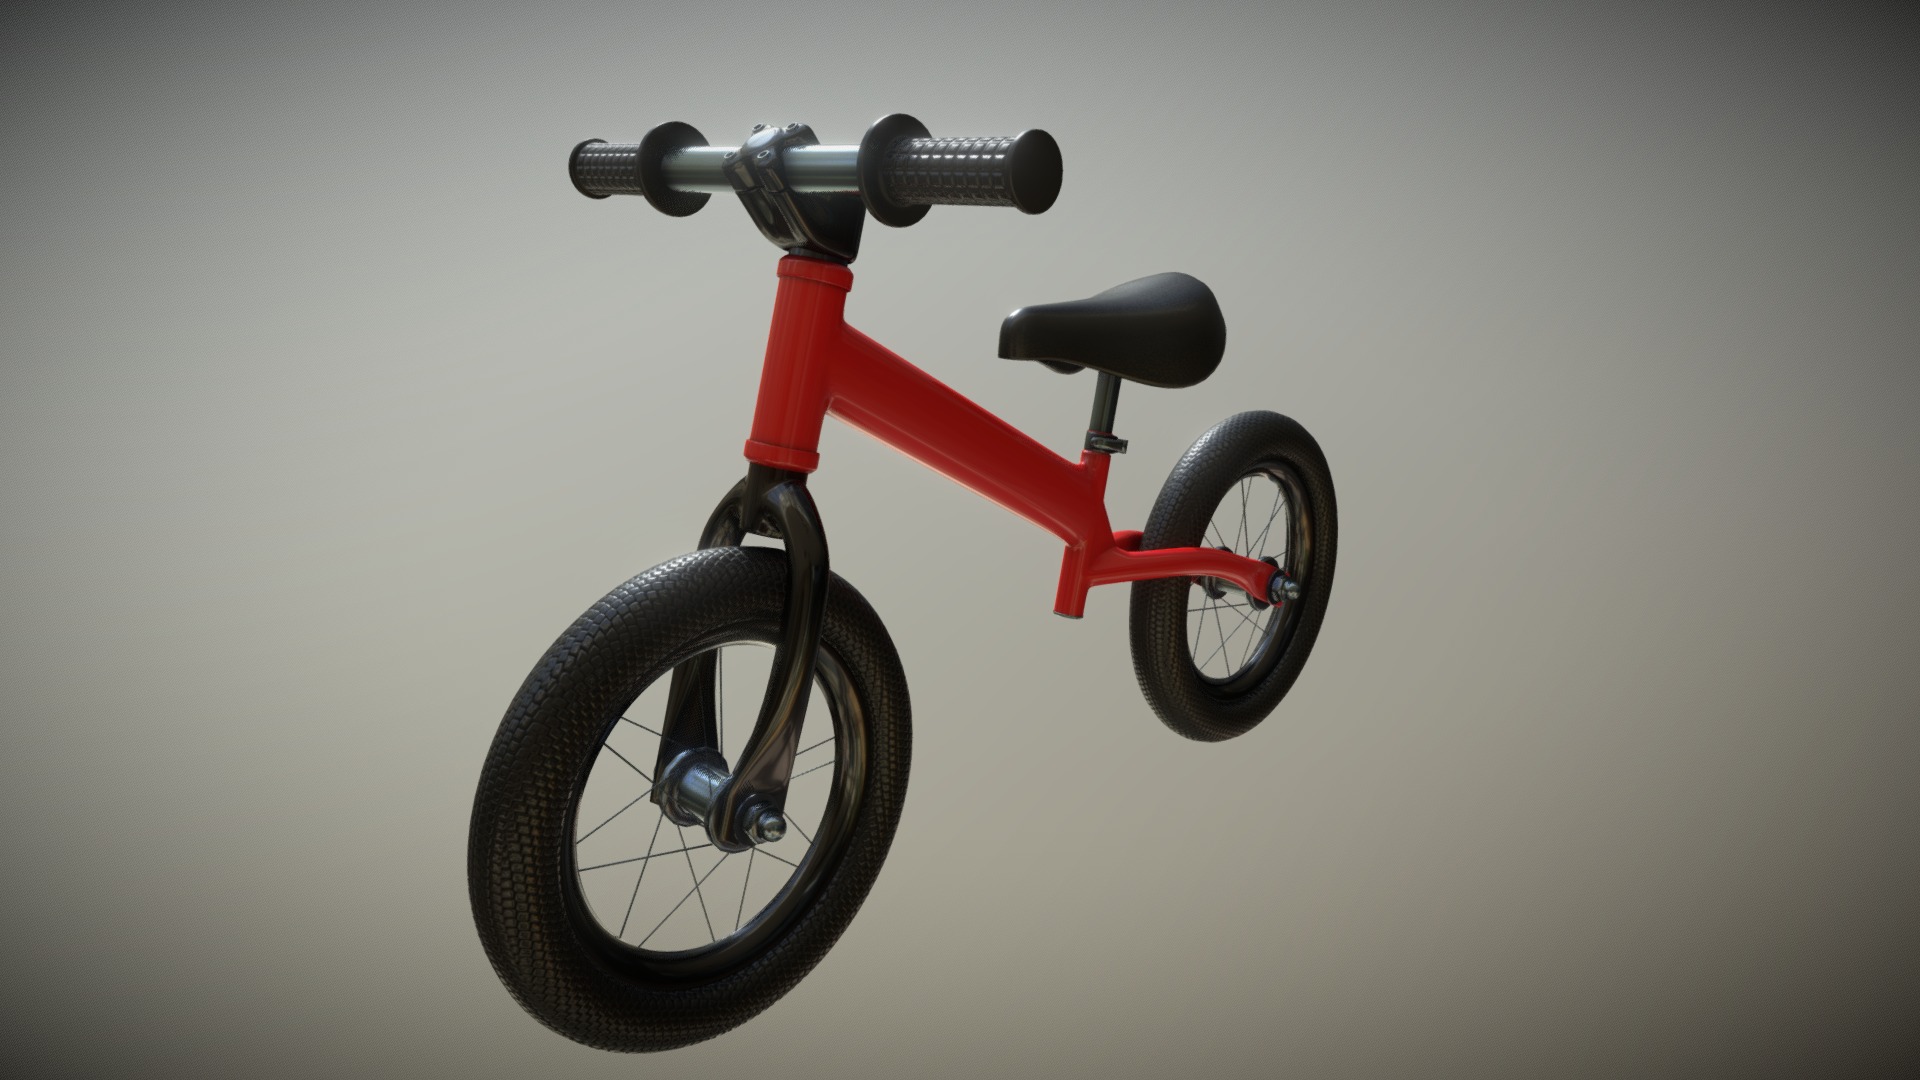 3D model Run bike - This is a 3D model of the Run bike. The 3D model is about a black and red bicycle.